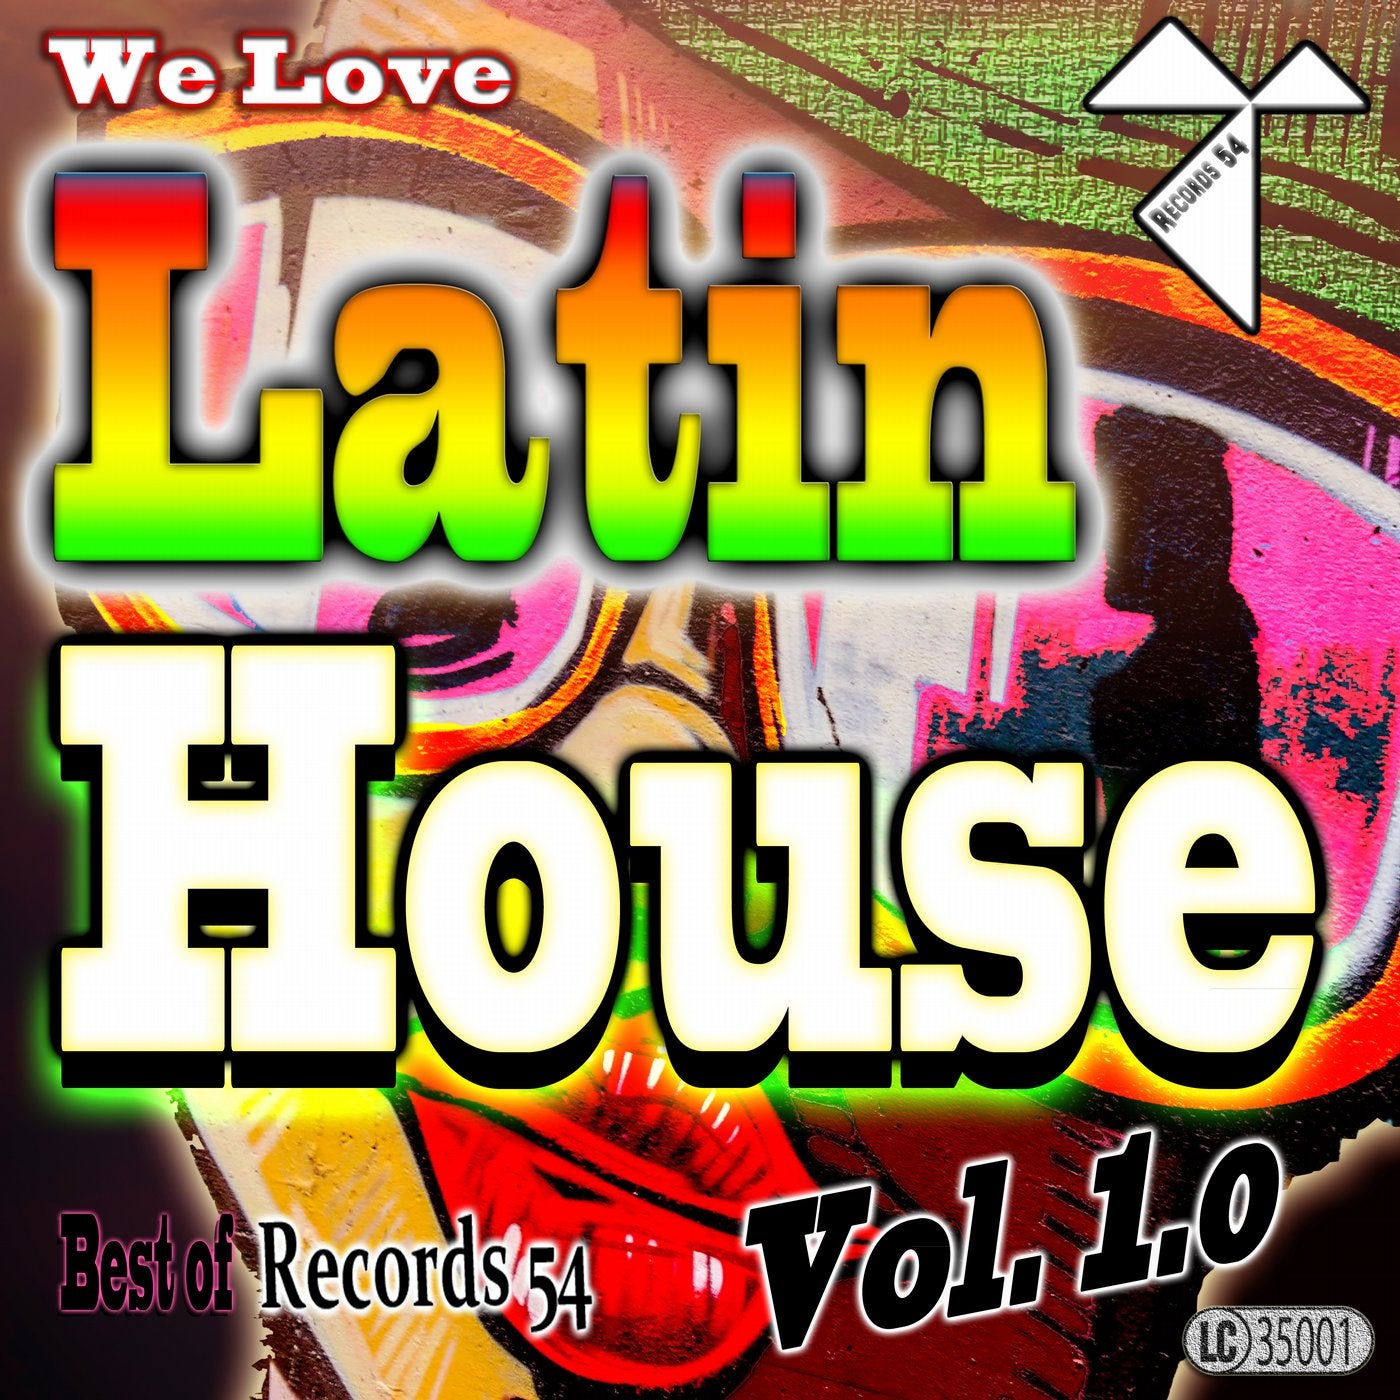 We Love Latin House: Best of Records 54, Vol. 1.0